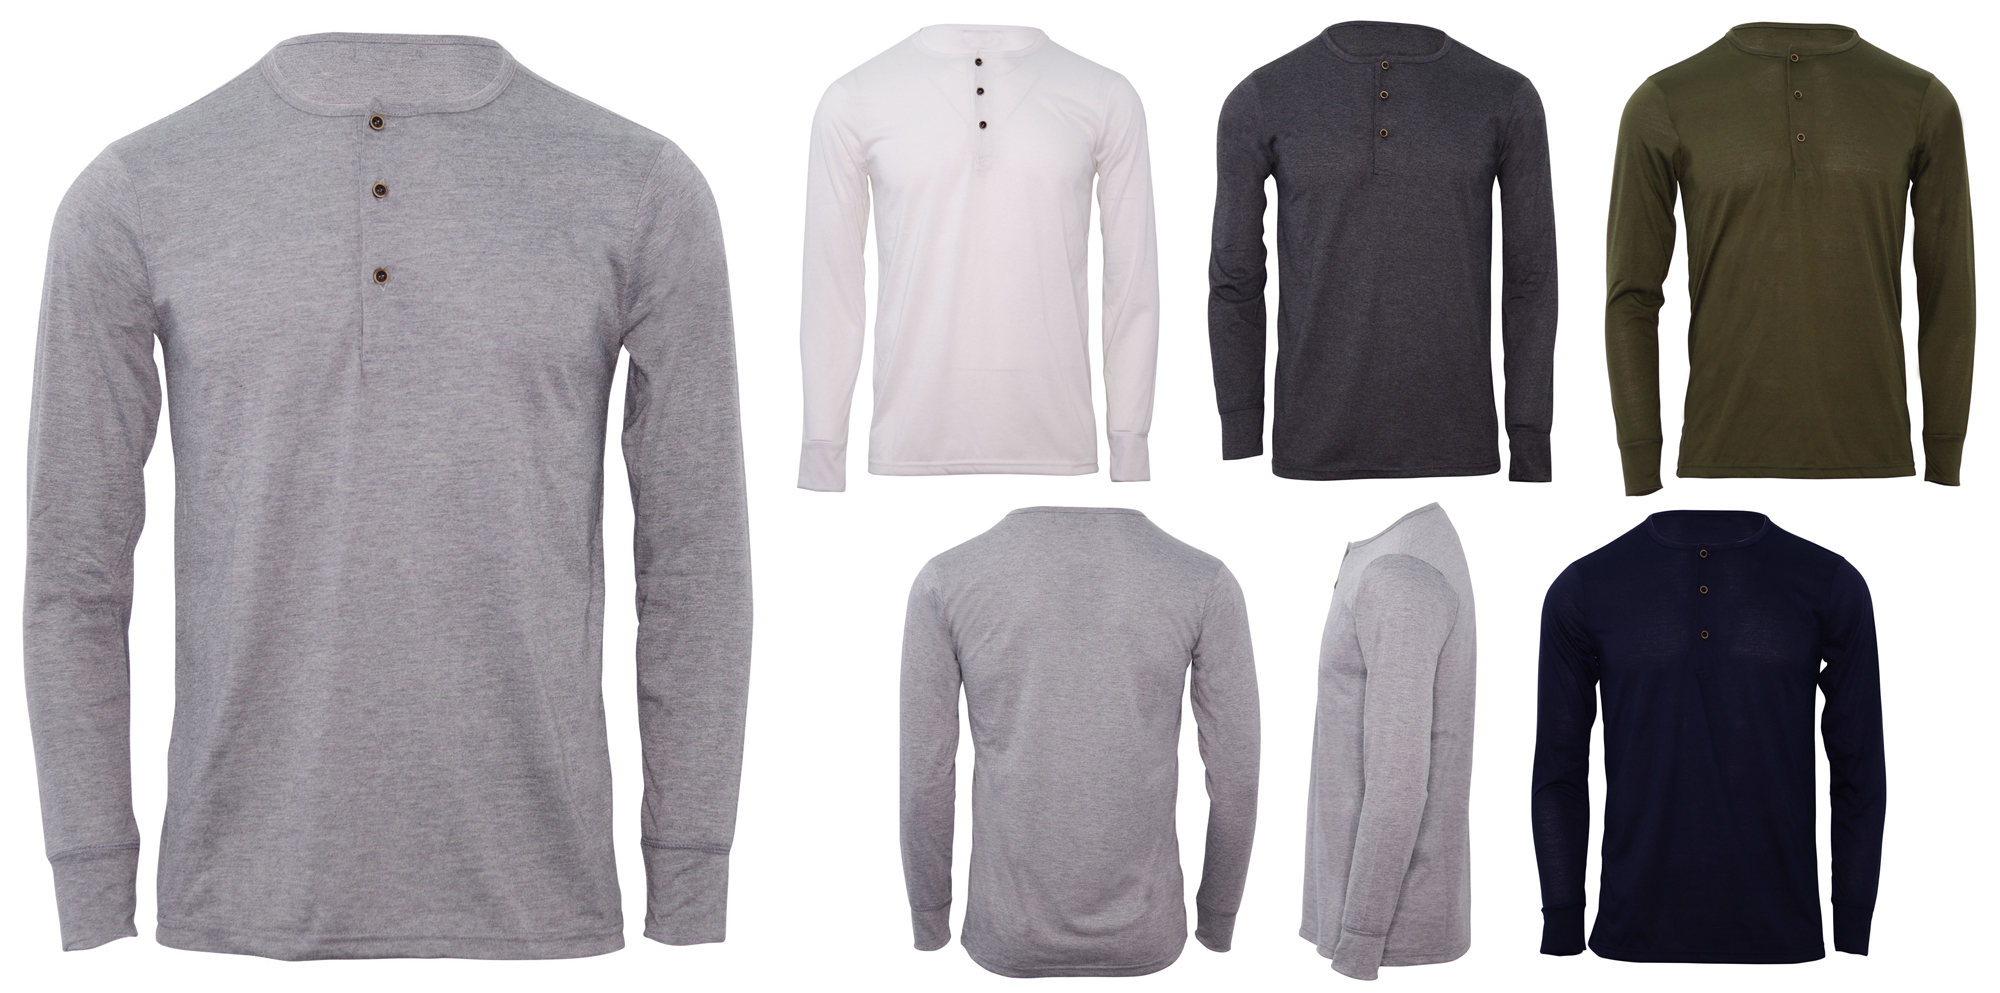 Men's JERSEY Knit Long Sleeve Henley Shirts - Choose Your Color(s)